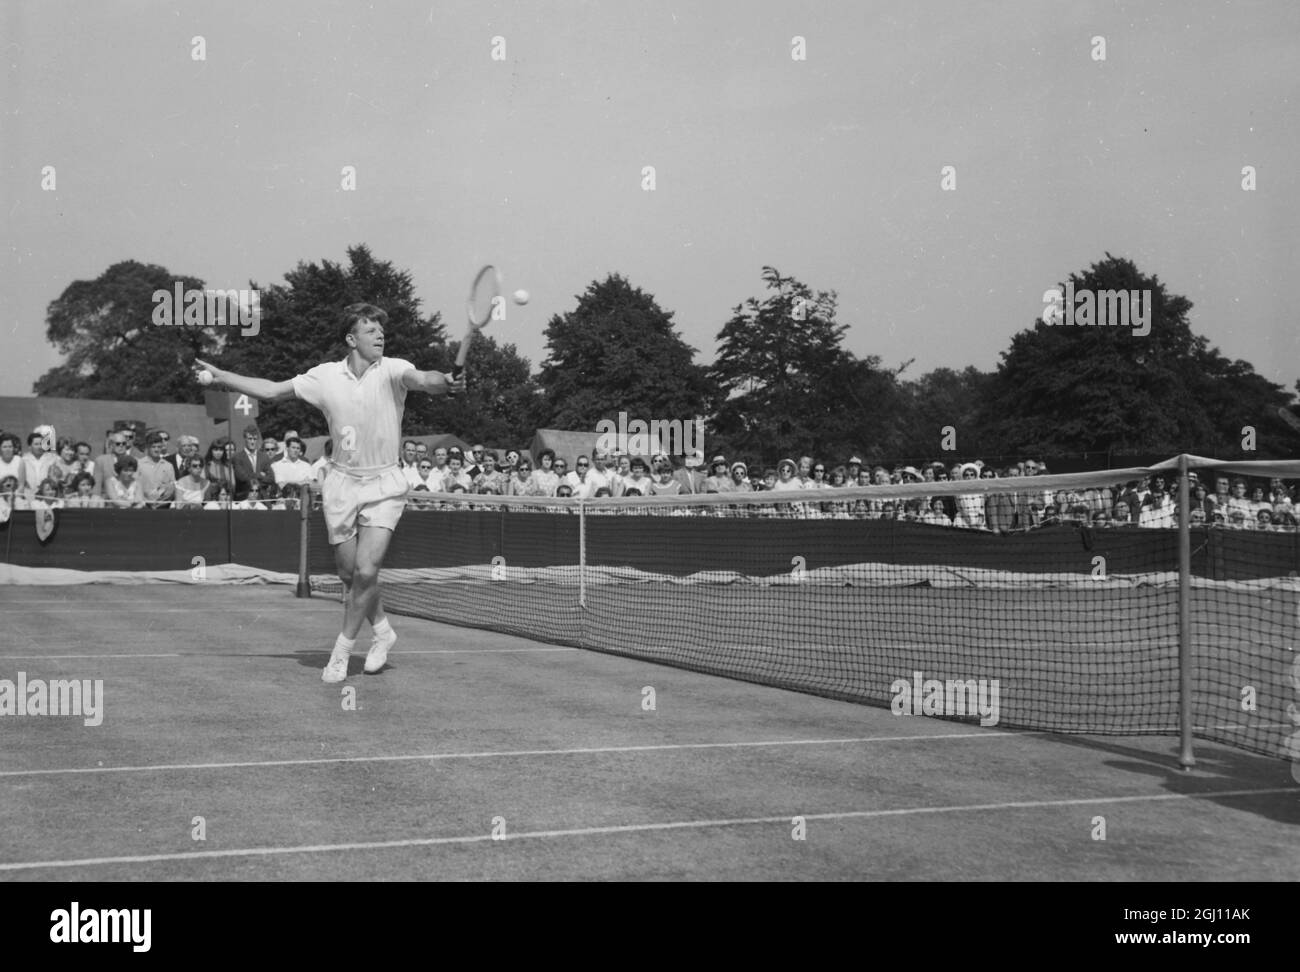 BILLY KNIGHT TENNIS PLAYER IN ACTION AT WIMBLEDON LAWN TENNIS CHAMPIONSHIPS- 28 JUNE 1961 Stock Photo